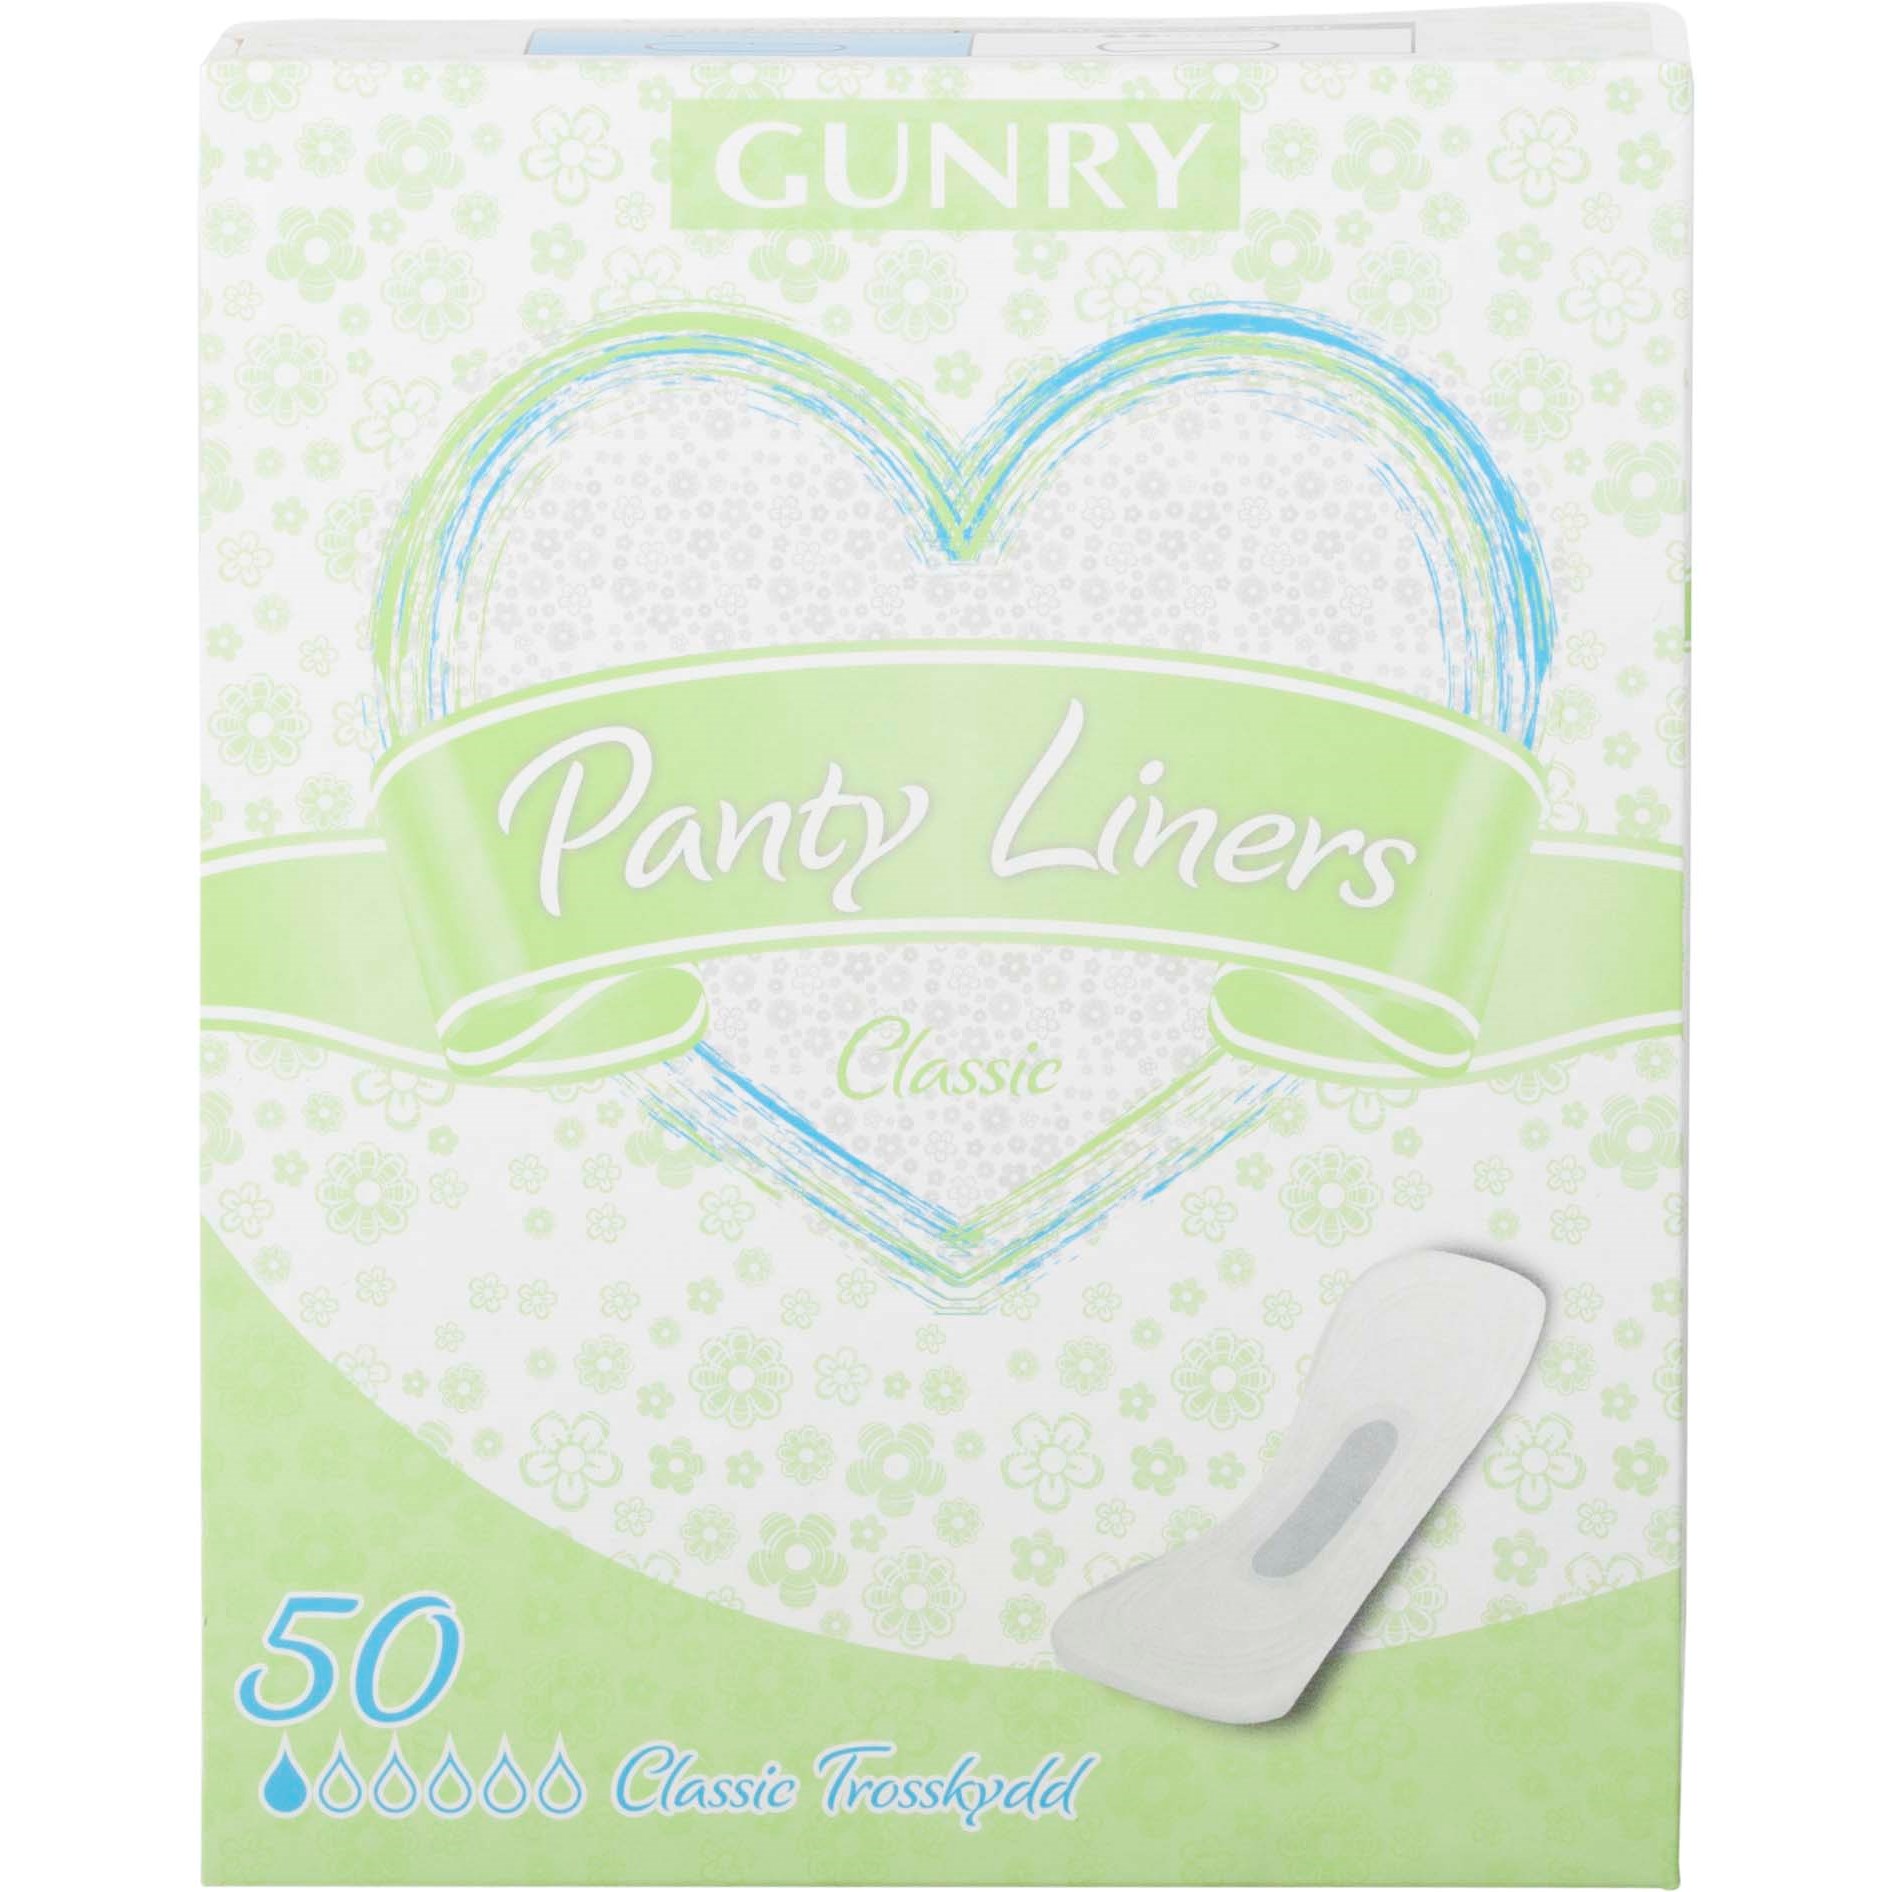 Gunry Panty Liners 50 st